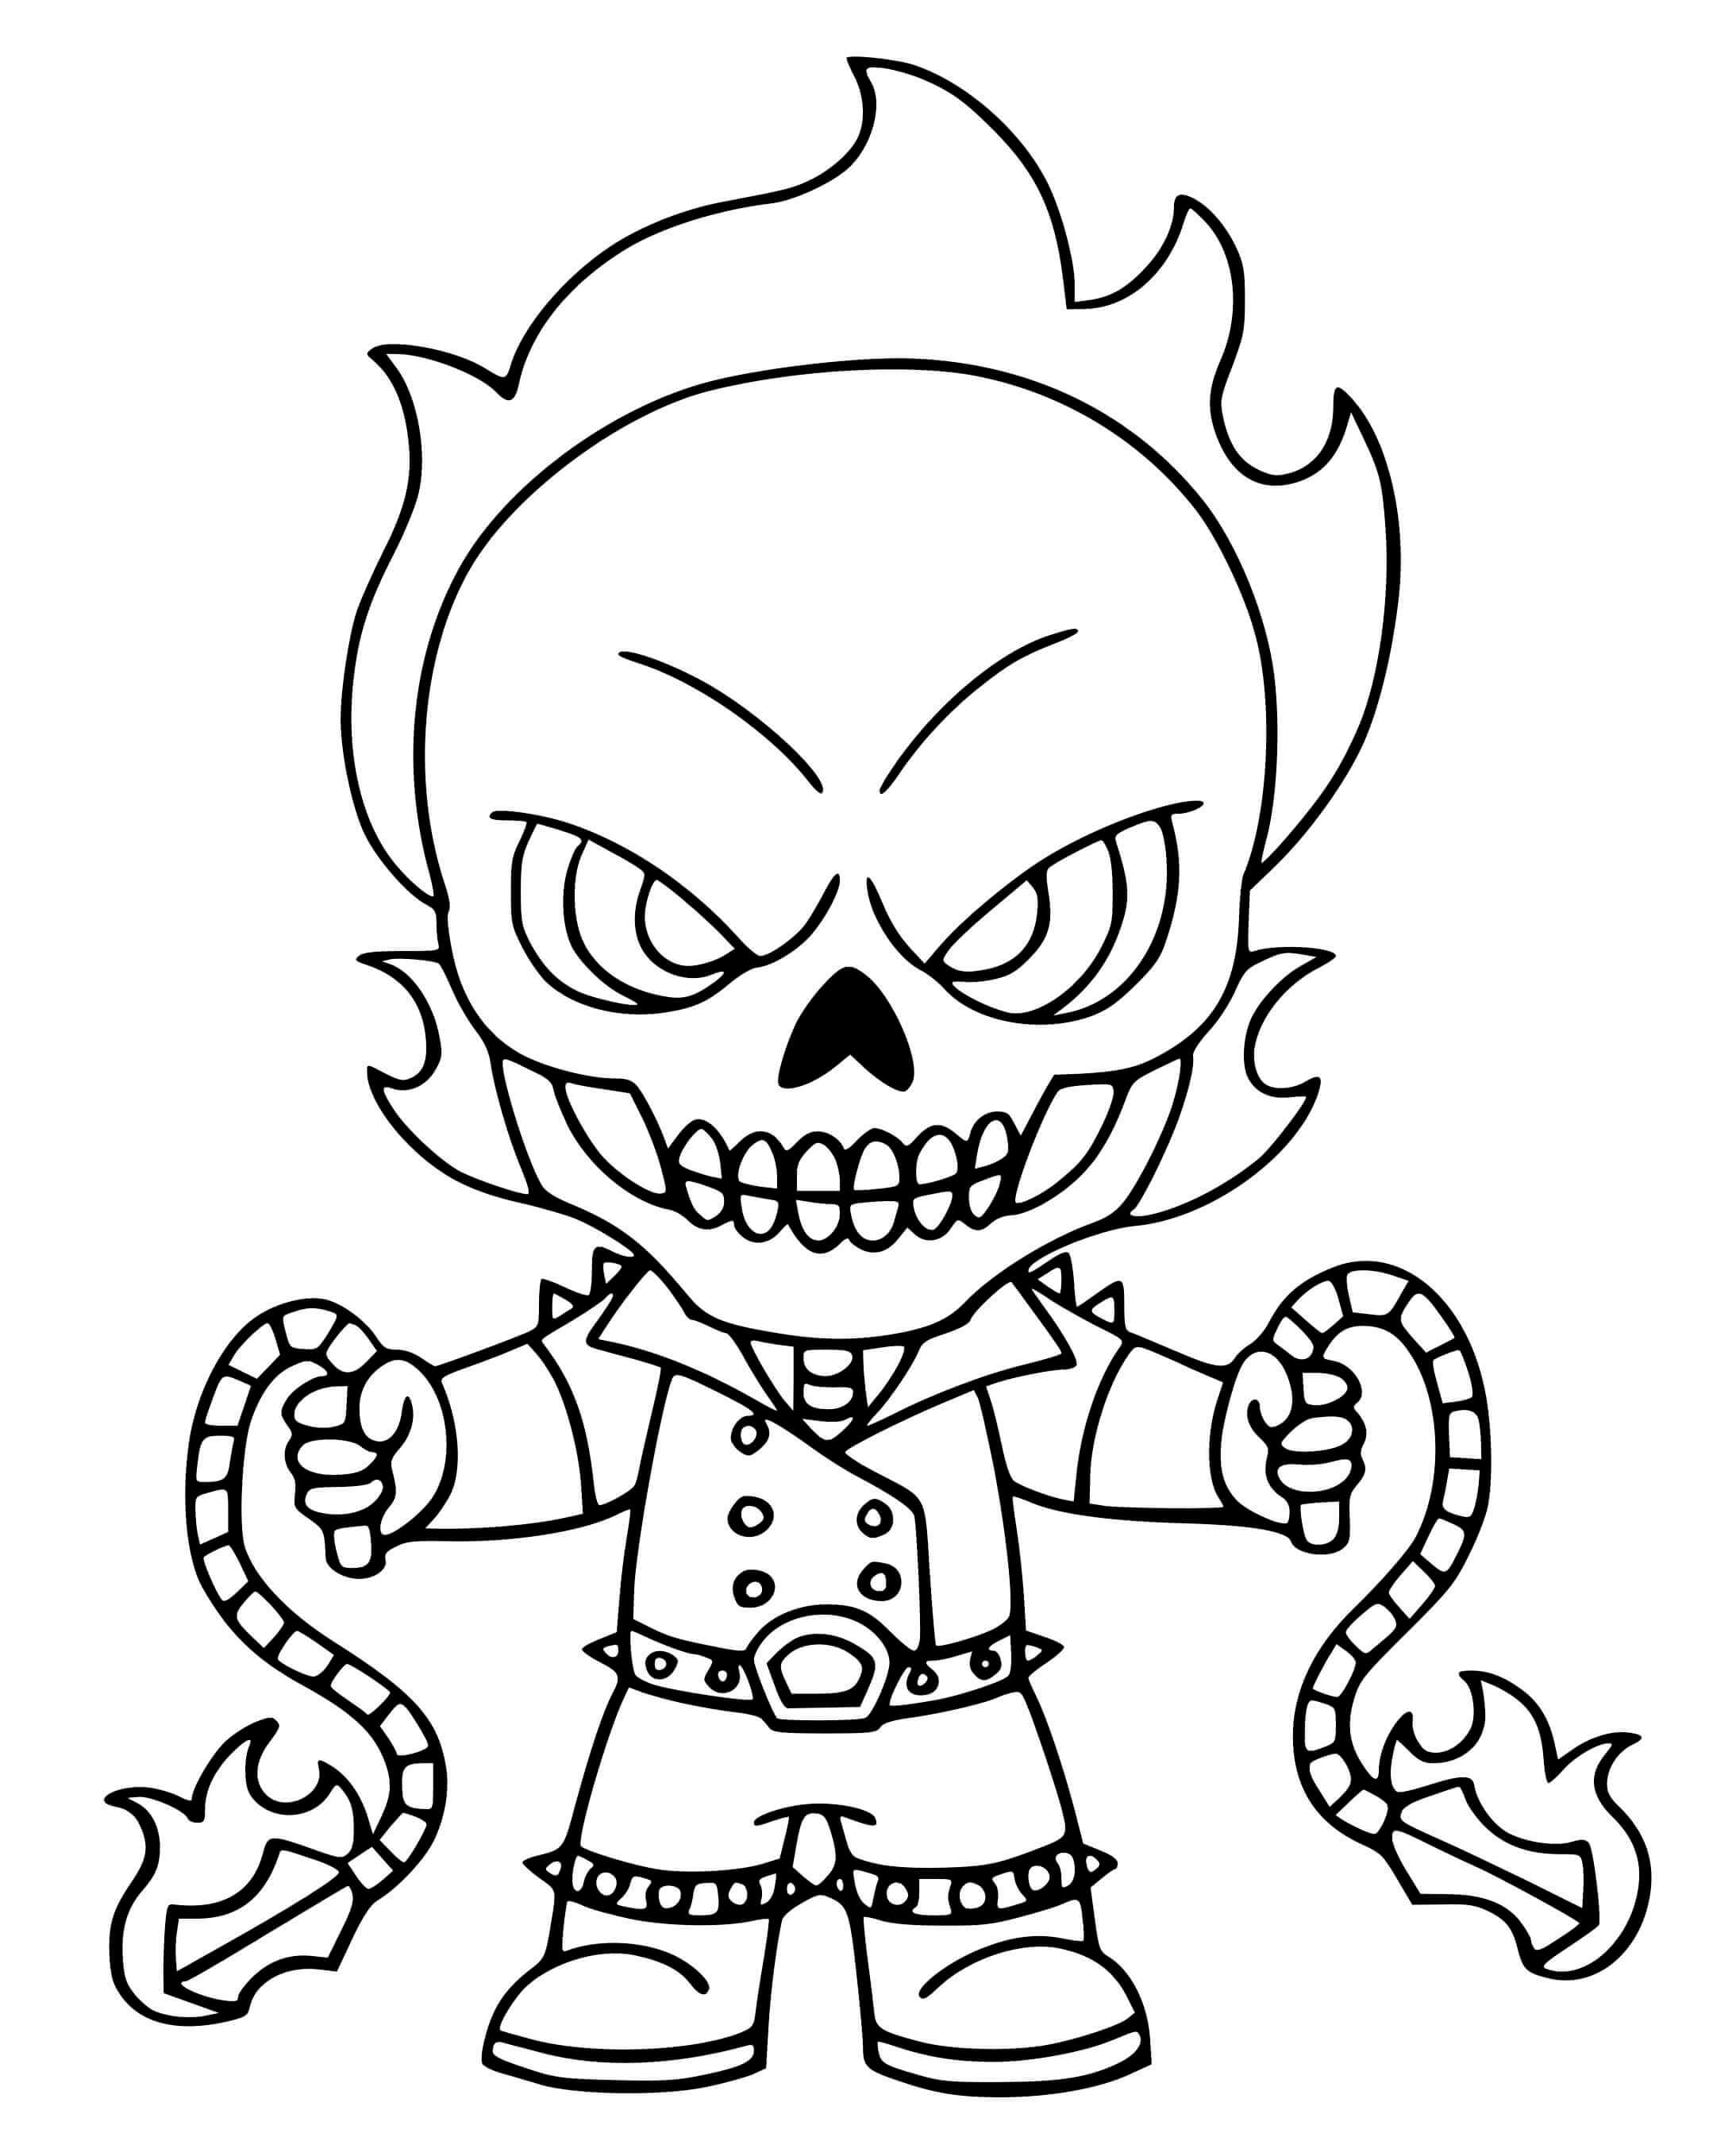 Ghostrider Skin From Fortnite Coloring Page